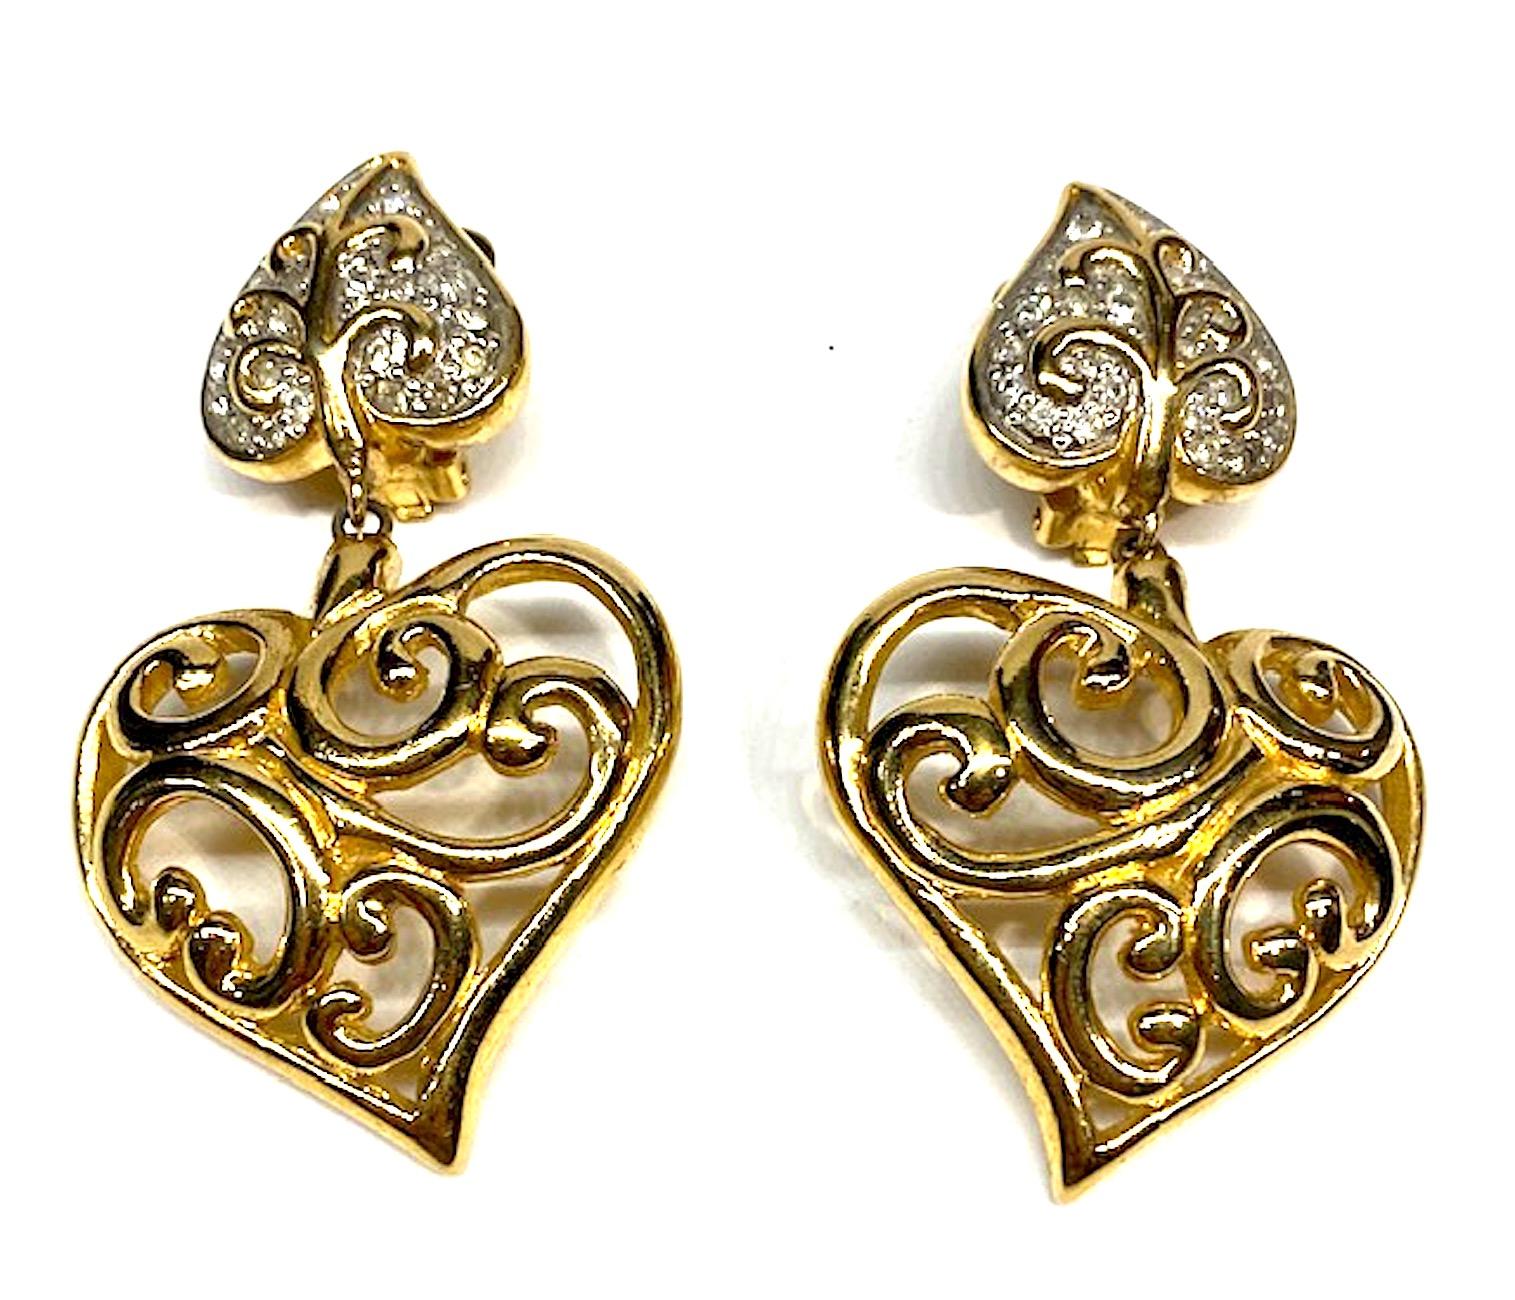 Fancy scrollwork  make up these large Valentino gold tone and rhinestone heart pendant earrings from the 1980s. The top leaf, .88 by 1 inch wide and high, is set with pave' rhinestones. Suspended from the leaf is a 1.63 by 1.5 inch scrollwork gold